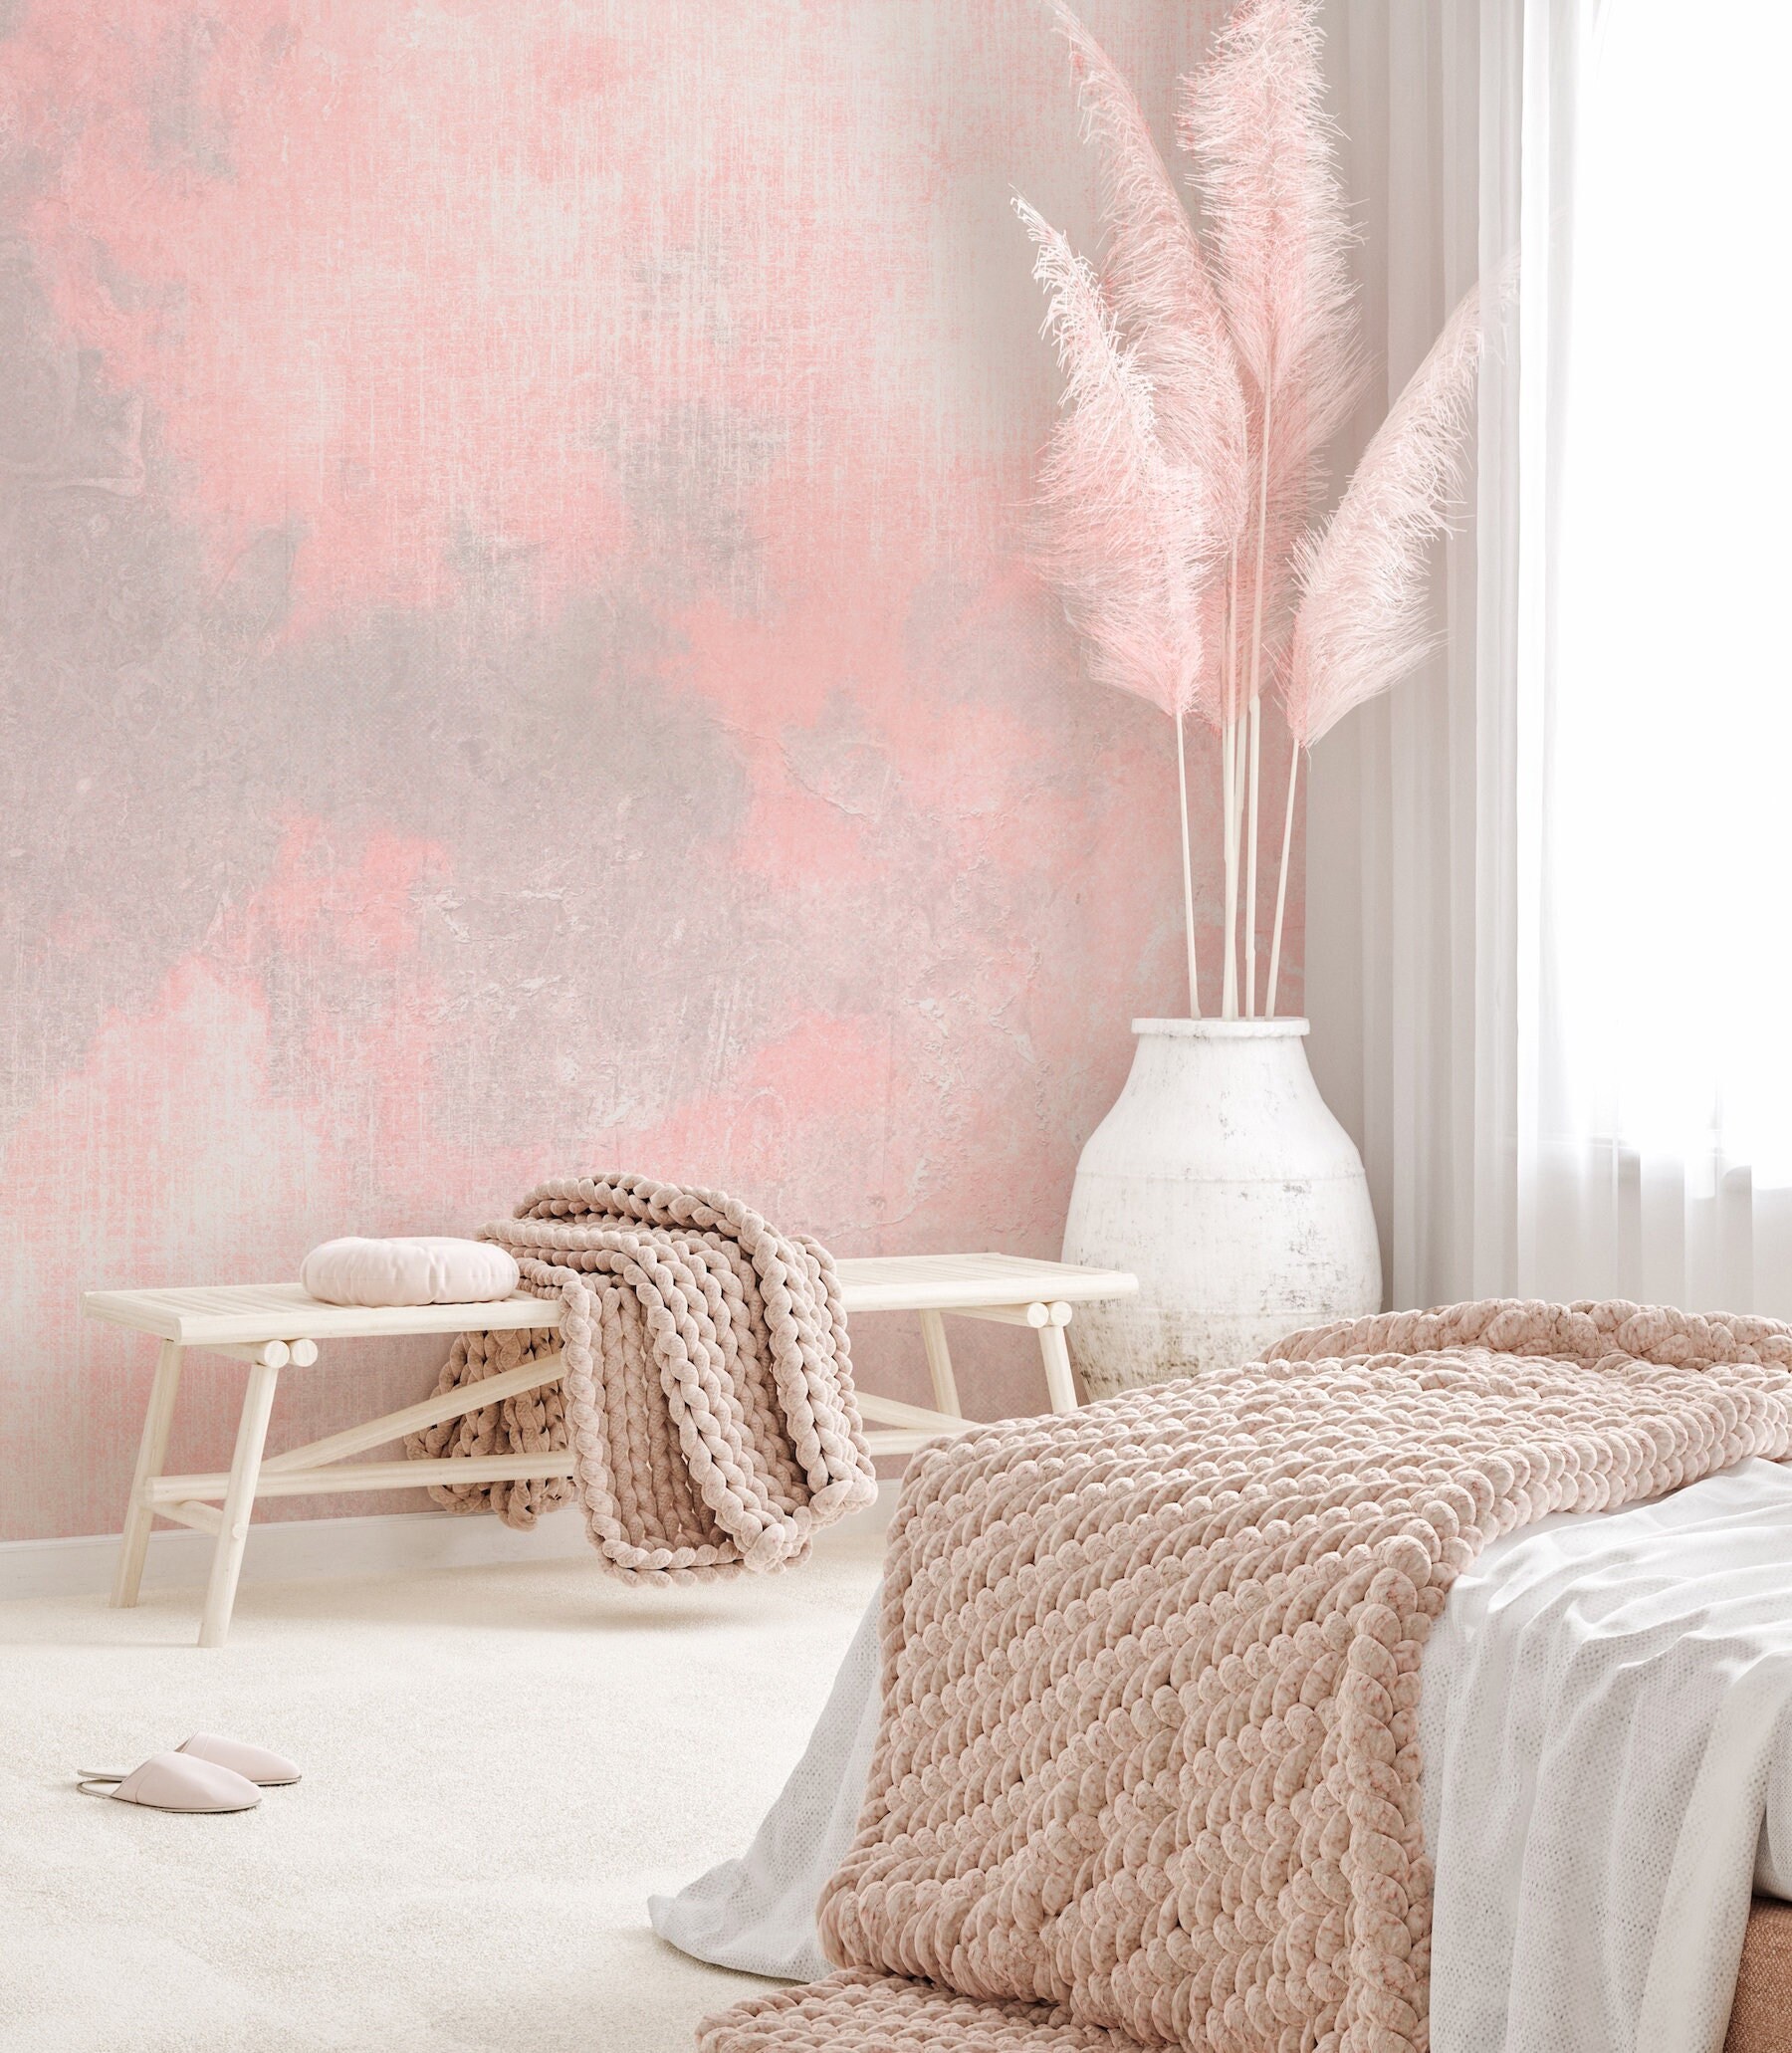 Pink Grey Watercolor Ombre Wallpaper Nursery, Paint Stains Wallpaper, Pastel  Wall Mural Self-adhesive Removable Wallpaper Splash Decor X873 